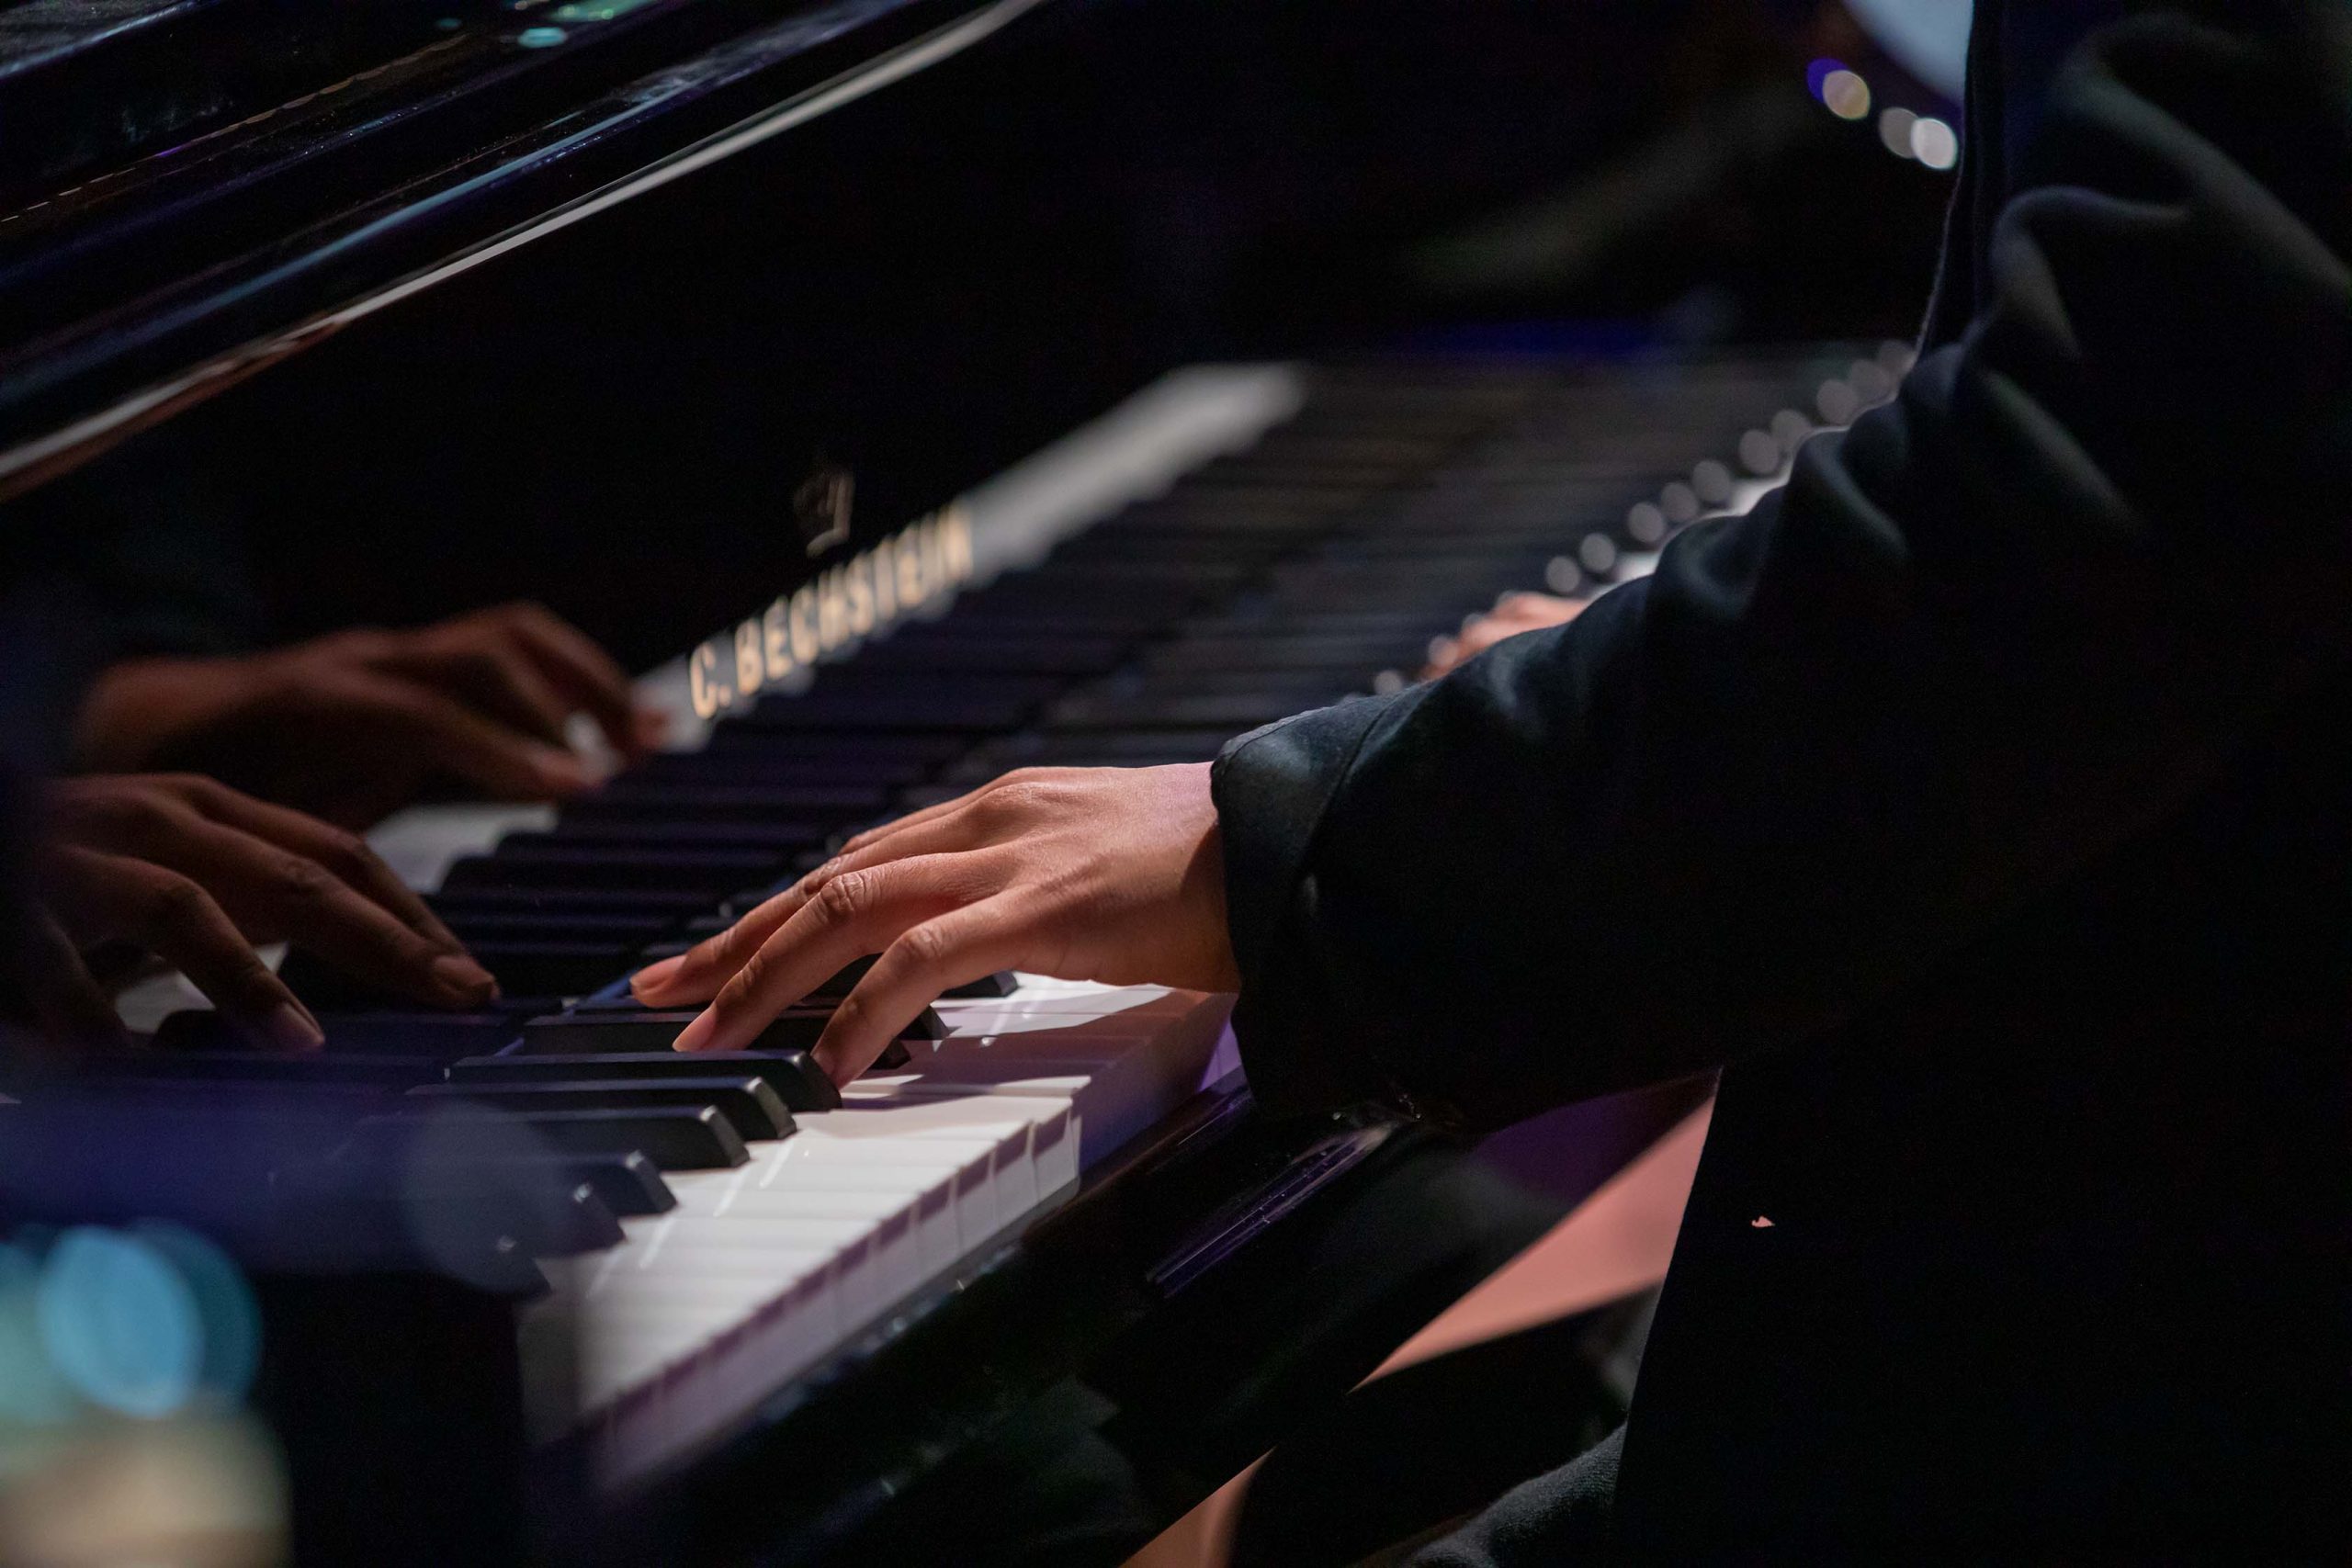 The two hands of Yannick Rafalimanana on a black C.Bechstein-Piano